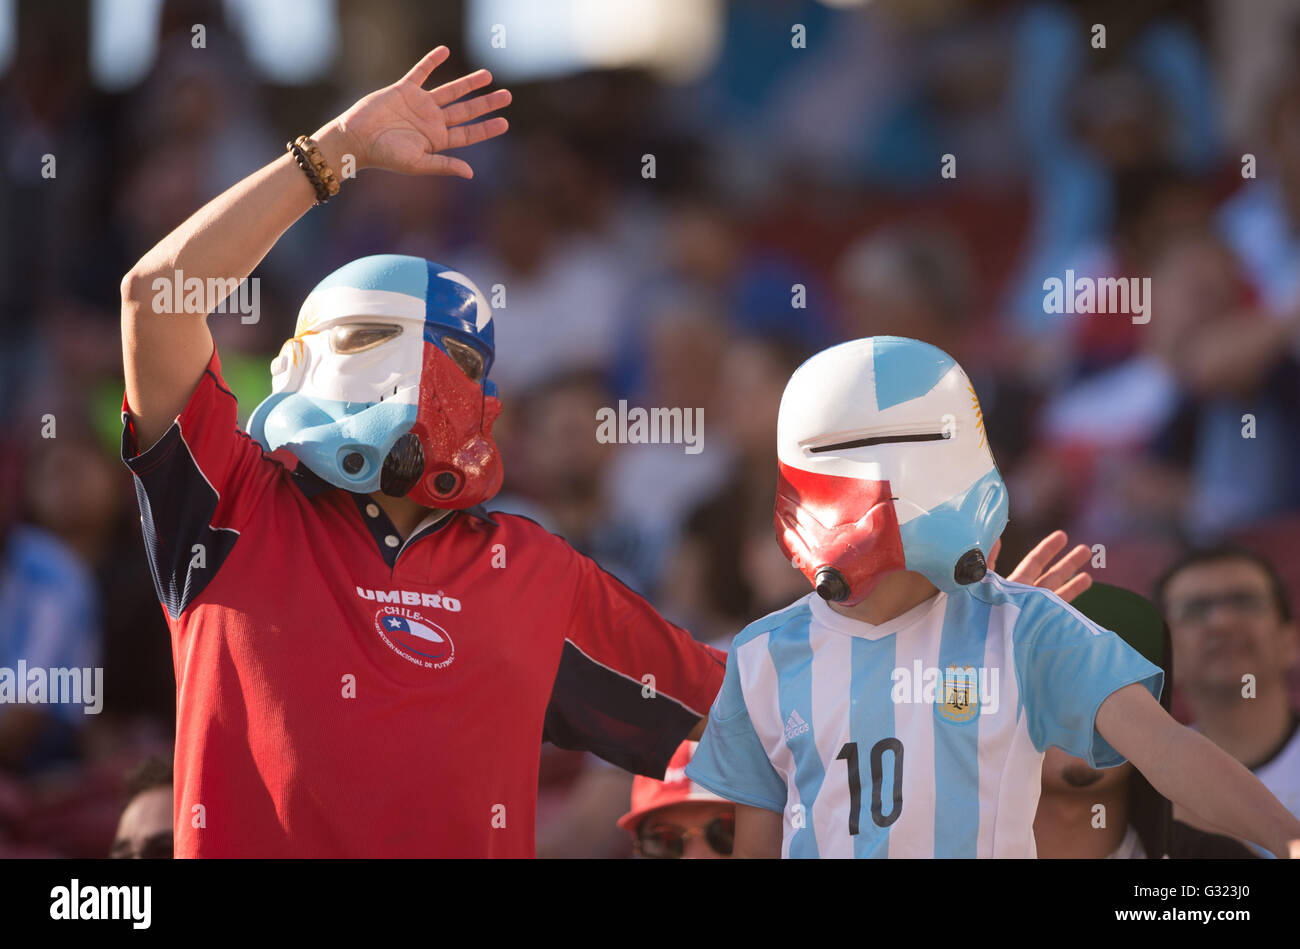 Santa Clara, USA. 6th June, 2016. Two supporters wait for the start of the Copa America Centenario Group D match between Argentina and Chile at the Levi's Stadium in Santa Clara, California, the United States, June 6, 2016. Credit:  Yang Lei/Xinhua/Alamy Live News Stock Photo